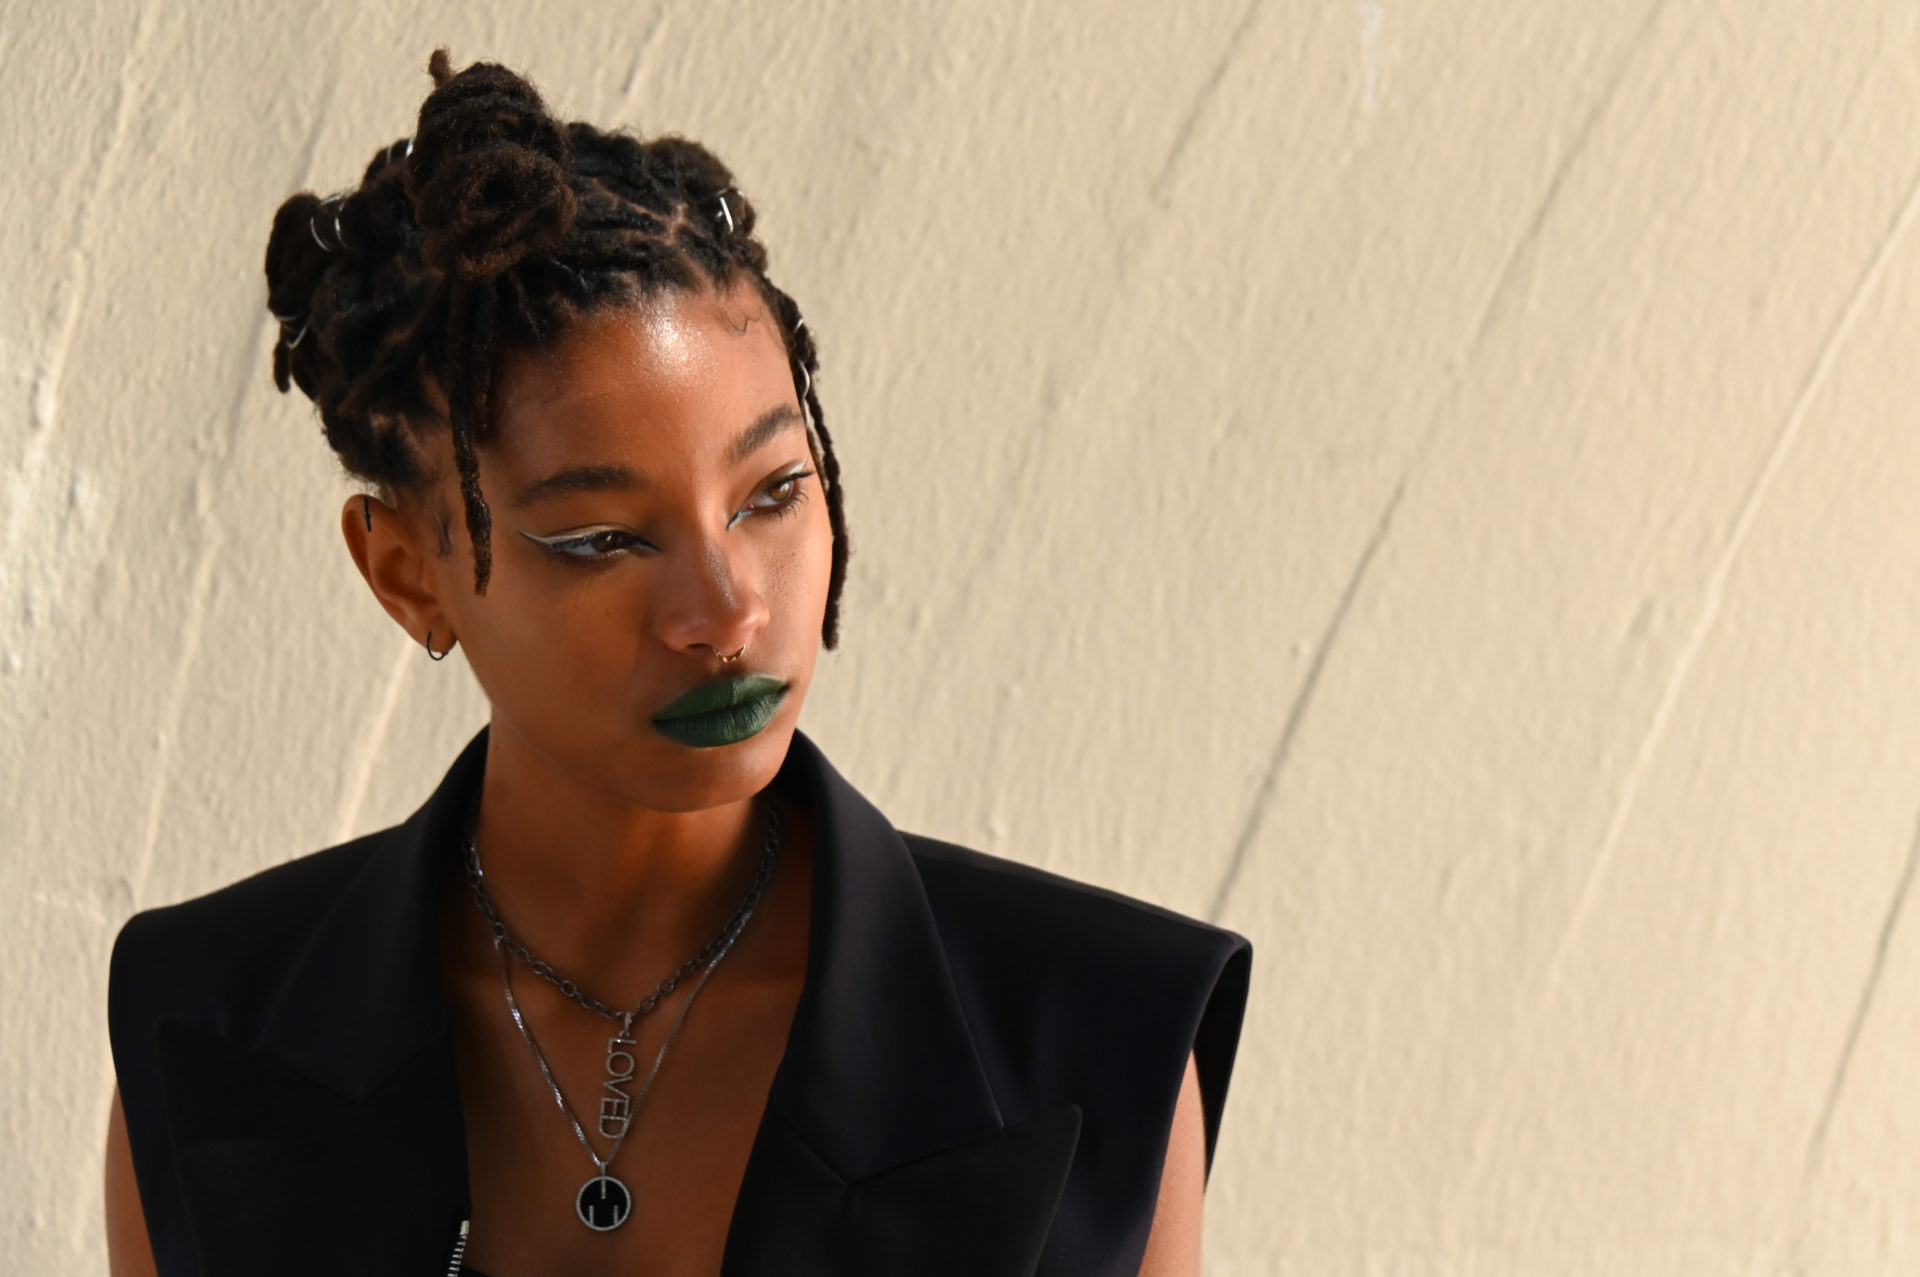 HD wallpaper, Willow Smith, Fans Disbelief, Desktop Hd Willow Smith Wallpaper Photo, 1920X1280 Hd Desktop, Celebrity Connection, Tupac Letter